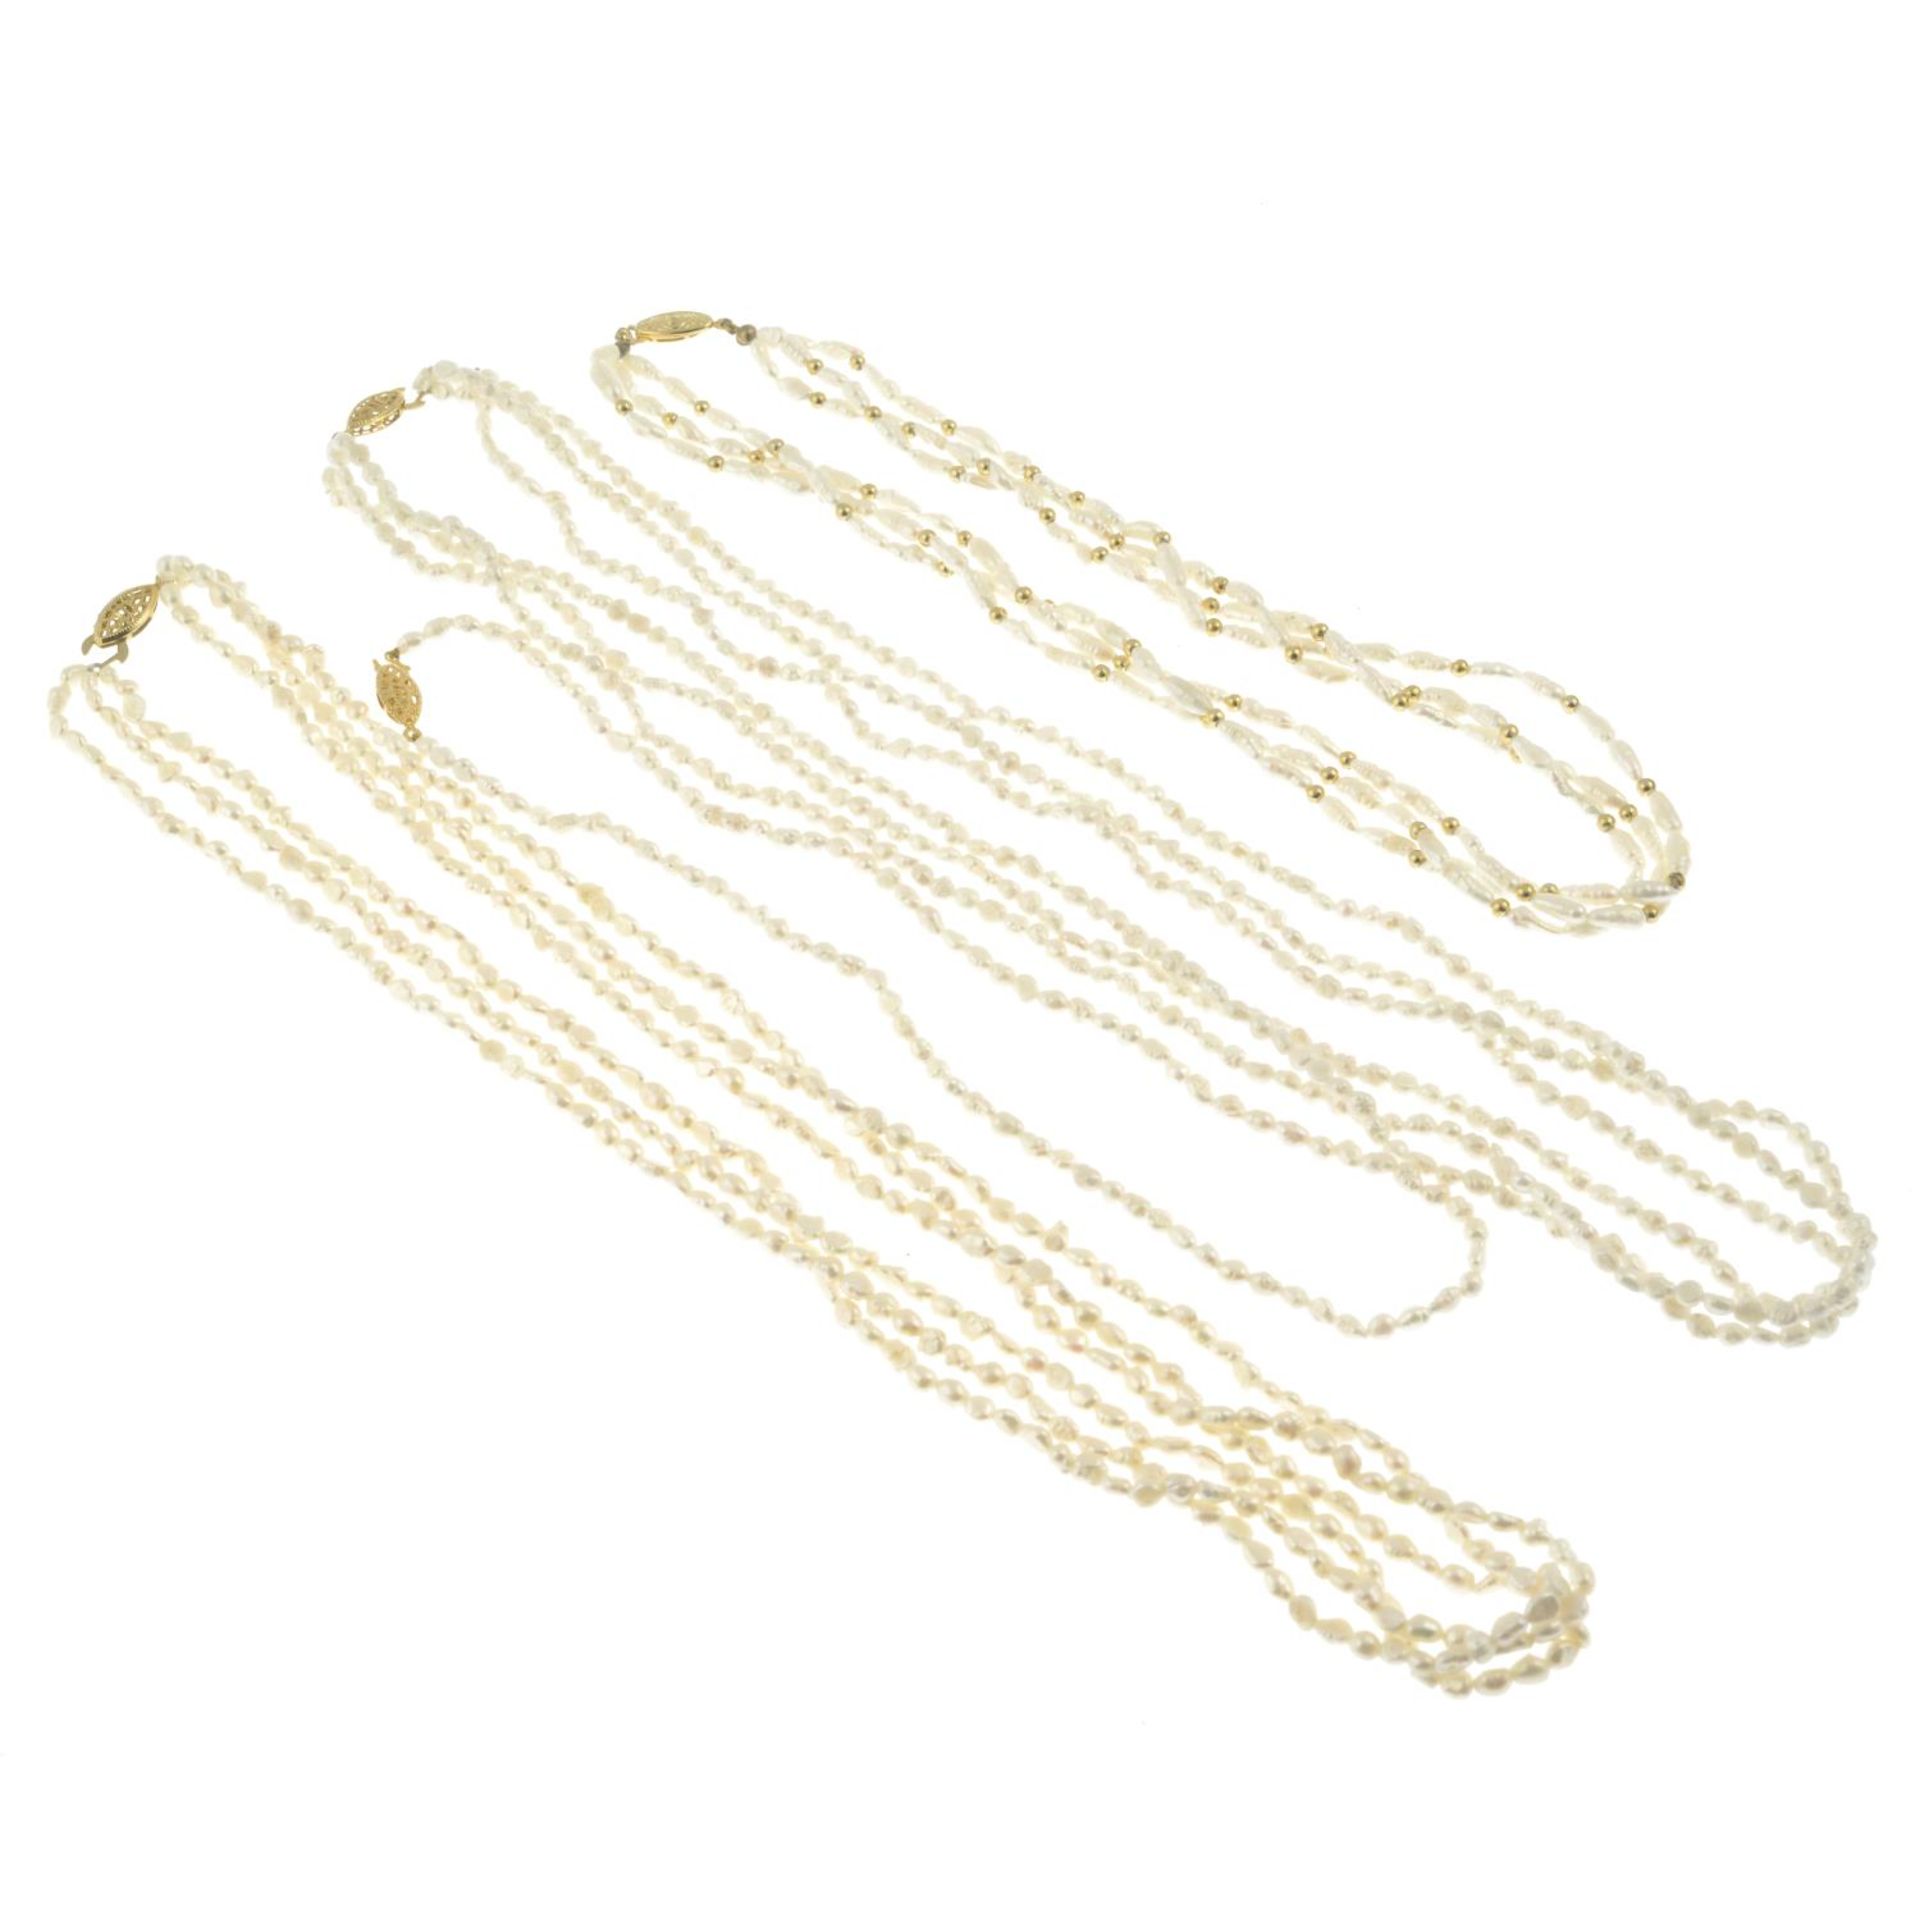 Four freshwater cultured pearl necklaces.Lengths of necklaces 42 to 60cms. - Image 2 of 2